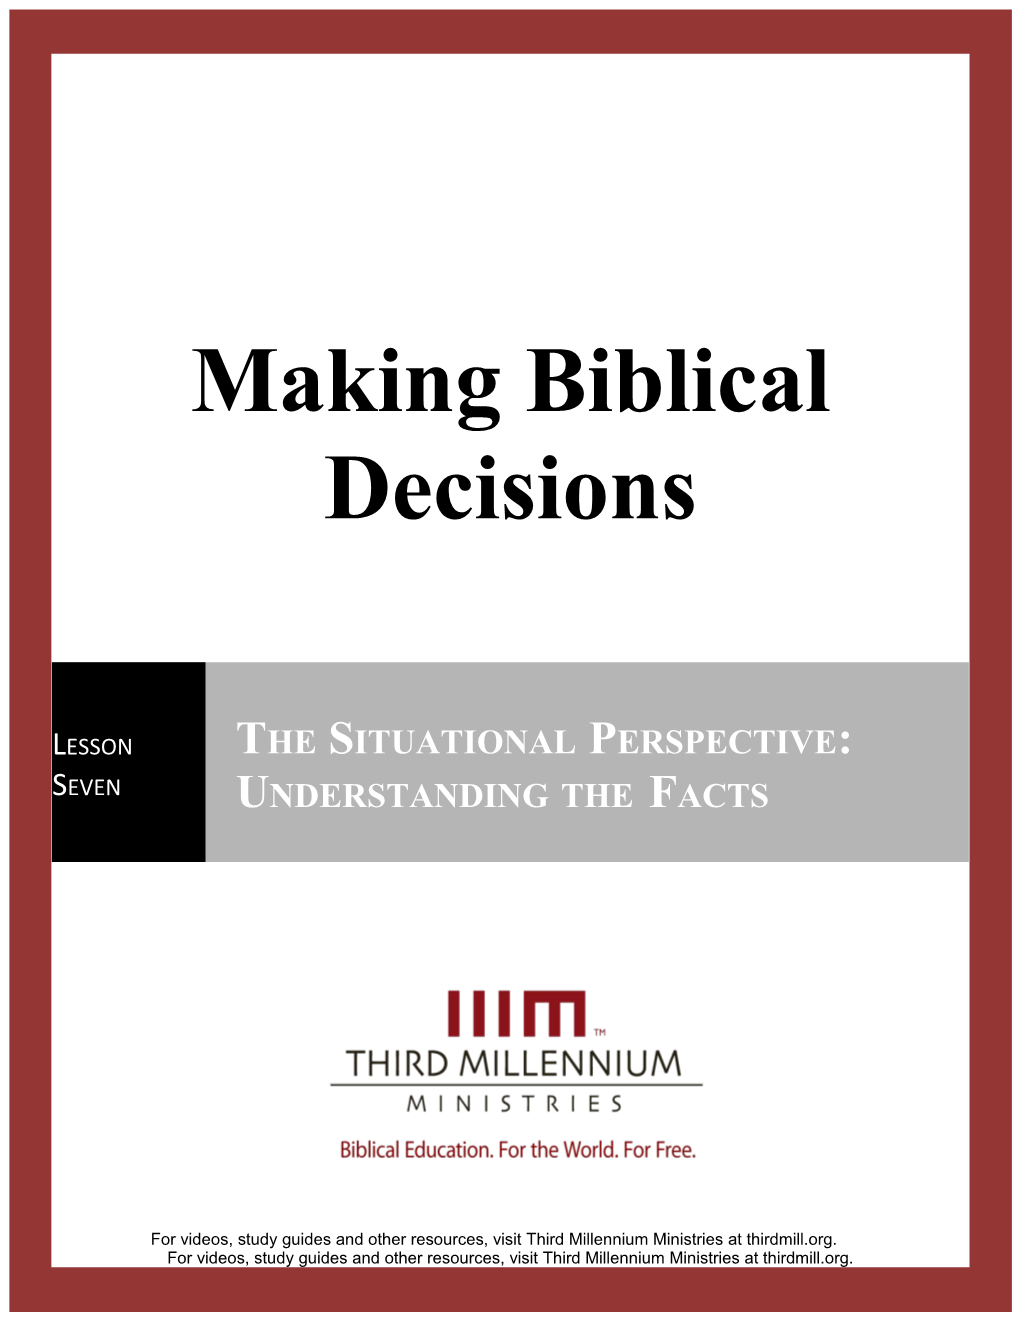 Making Biblical Decisions, Lesson 7